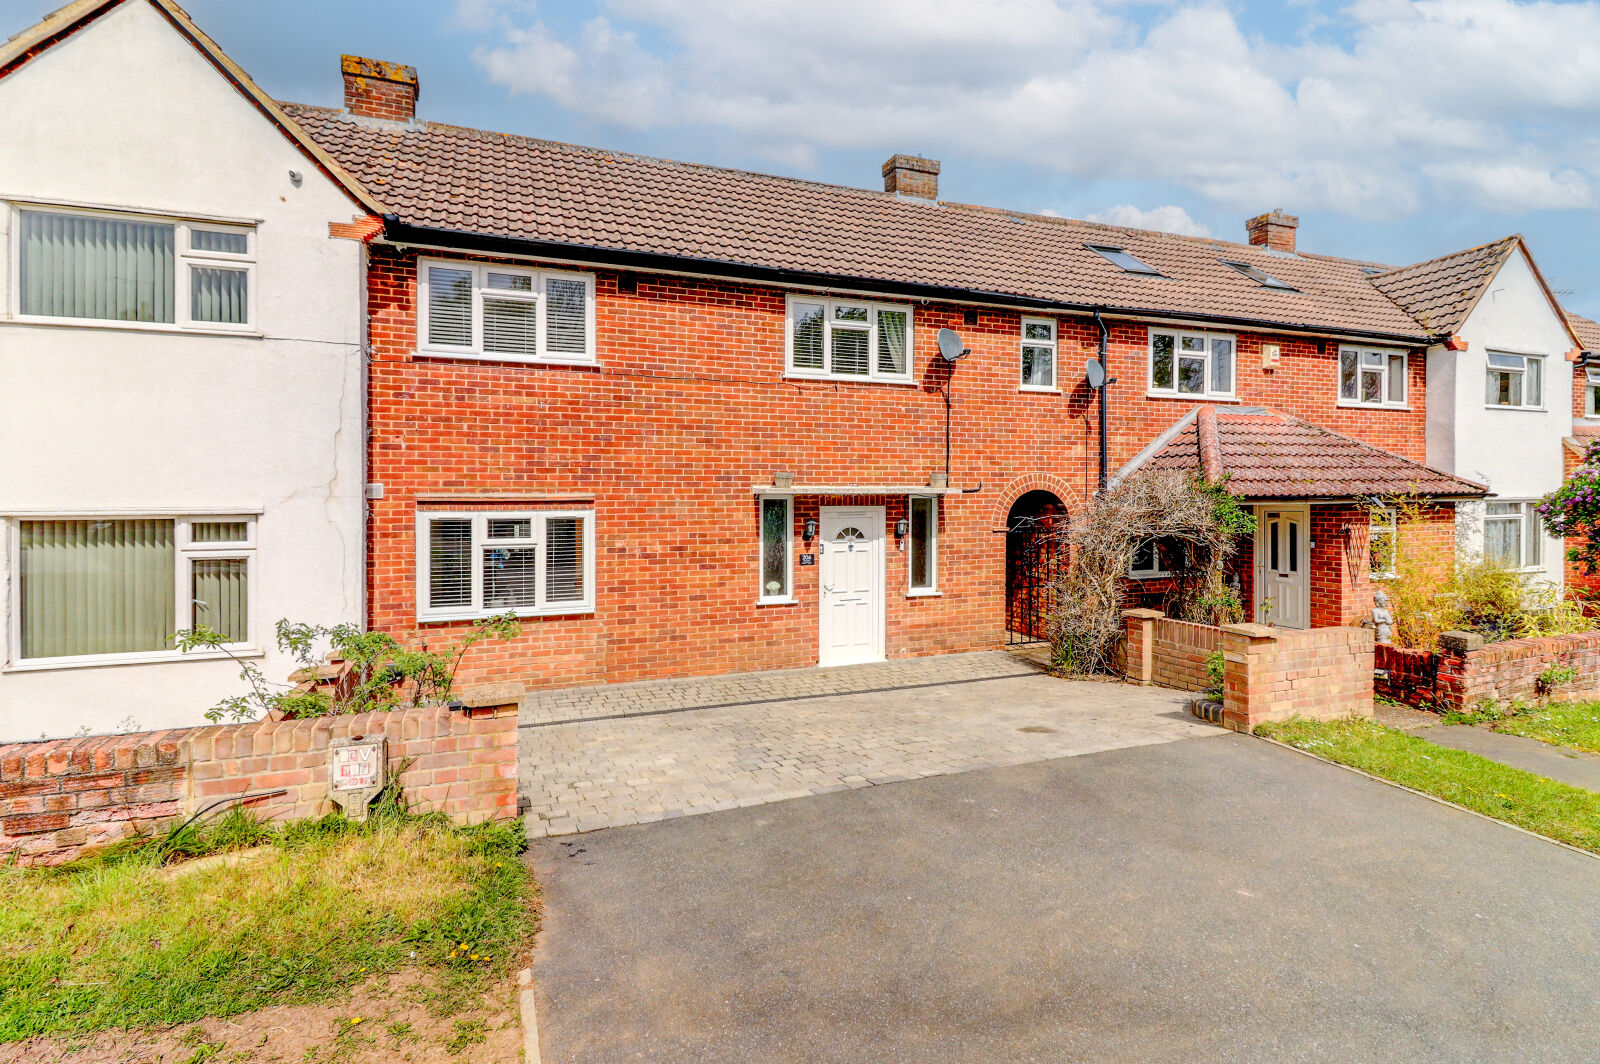 3 bedroom mid terraced house for sale Chairborough Road, High Wycombe, HP12, main image